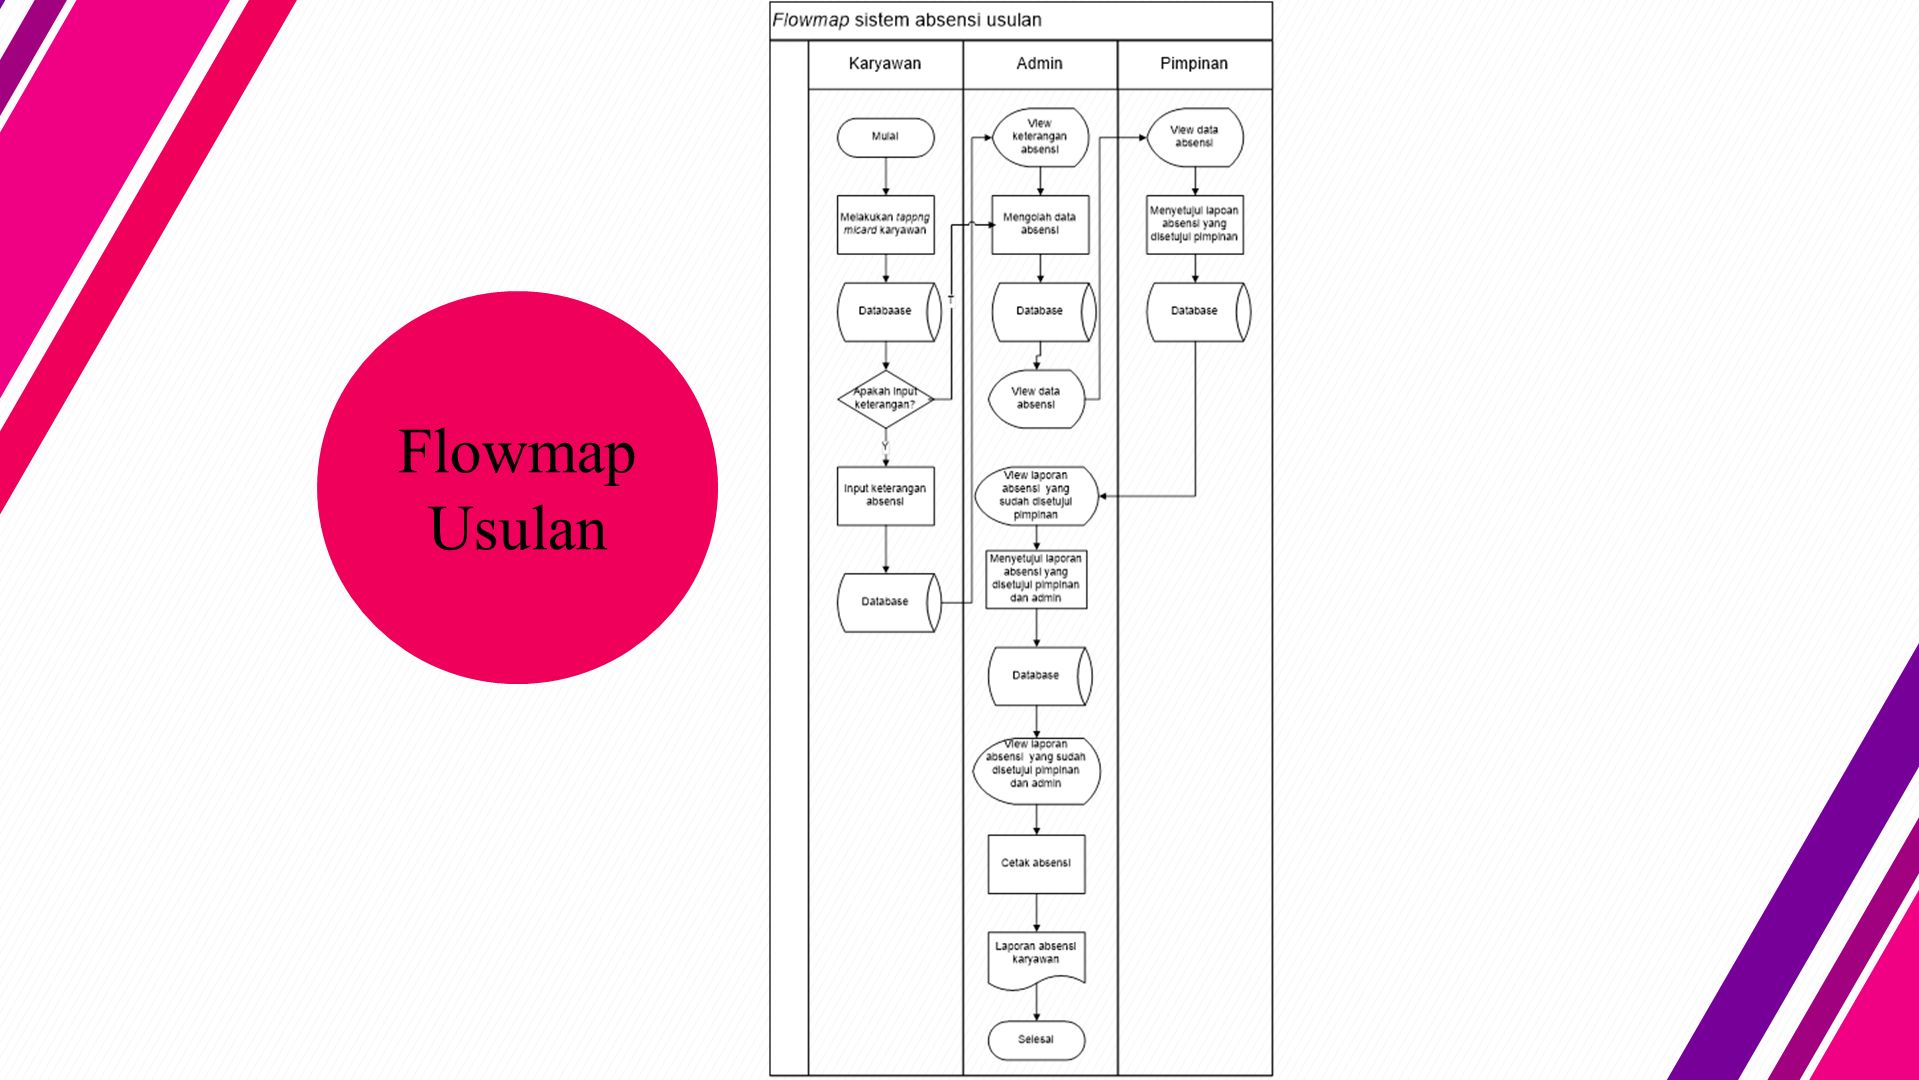 From 12:30pm to 2:00pm Flowmap Usulan